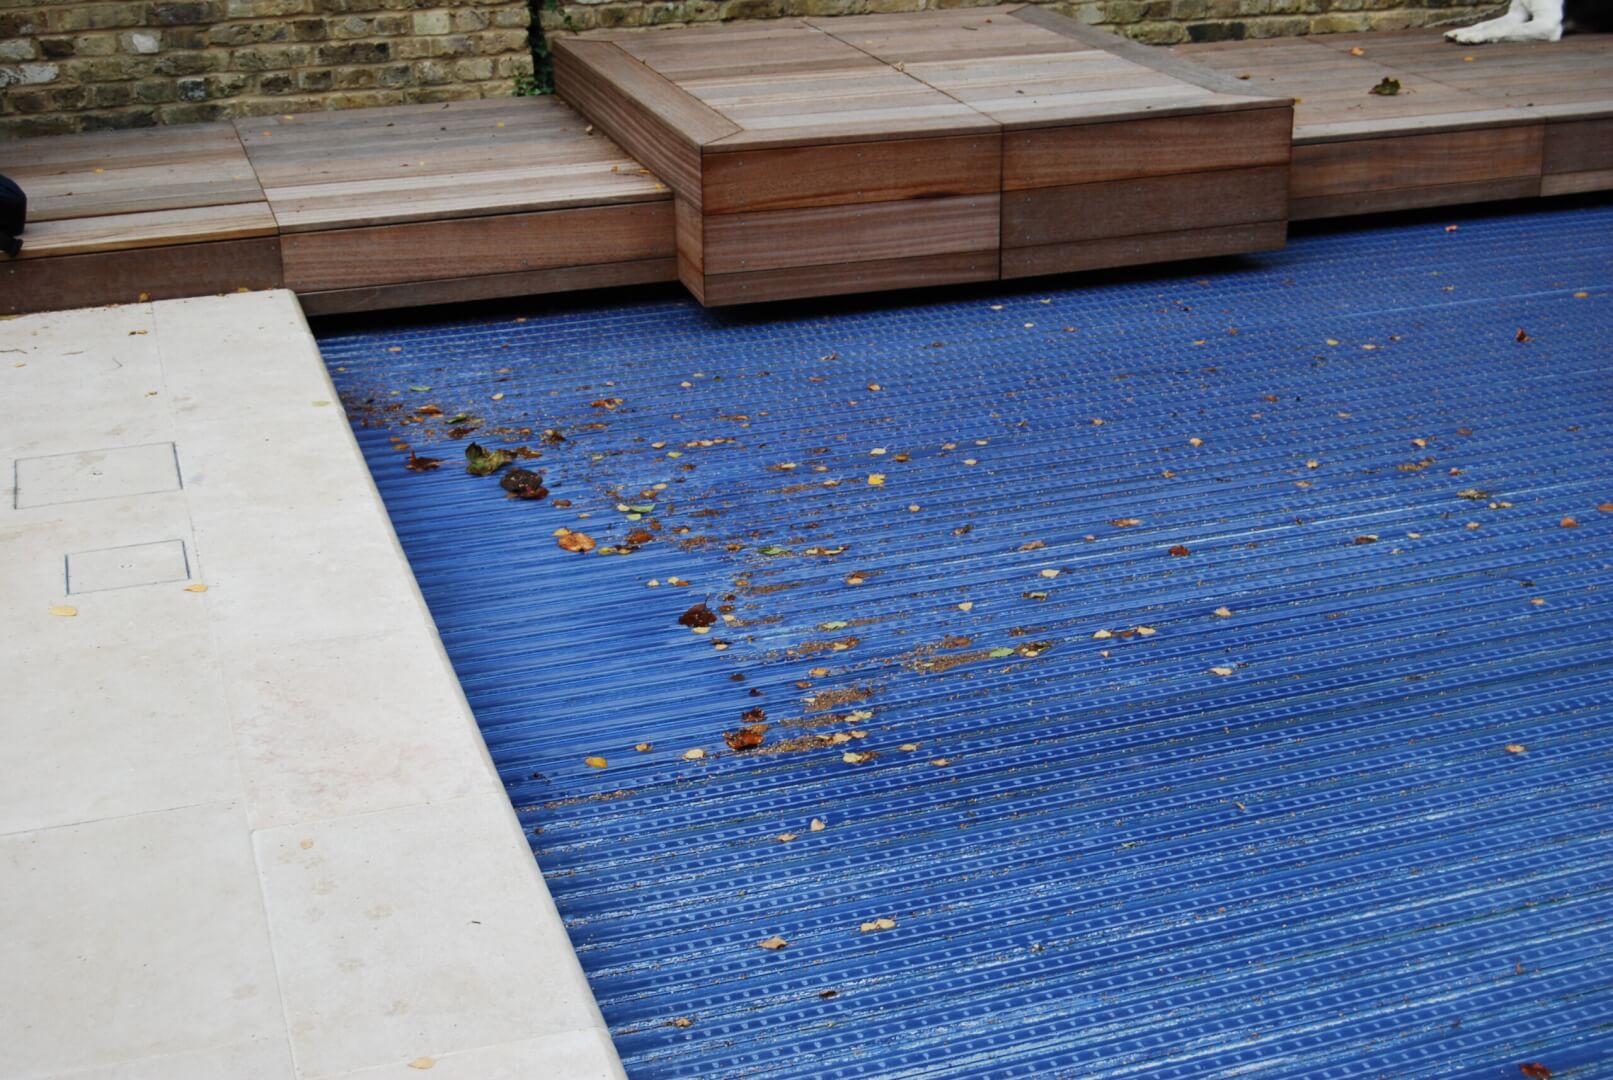 Closing your outdoor swimming pool for winter? Now is the time to start